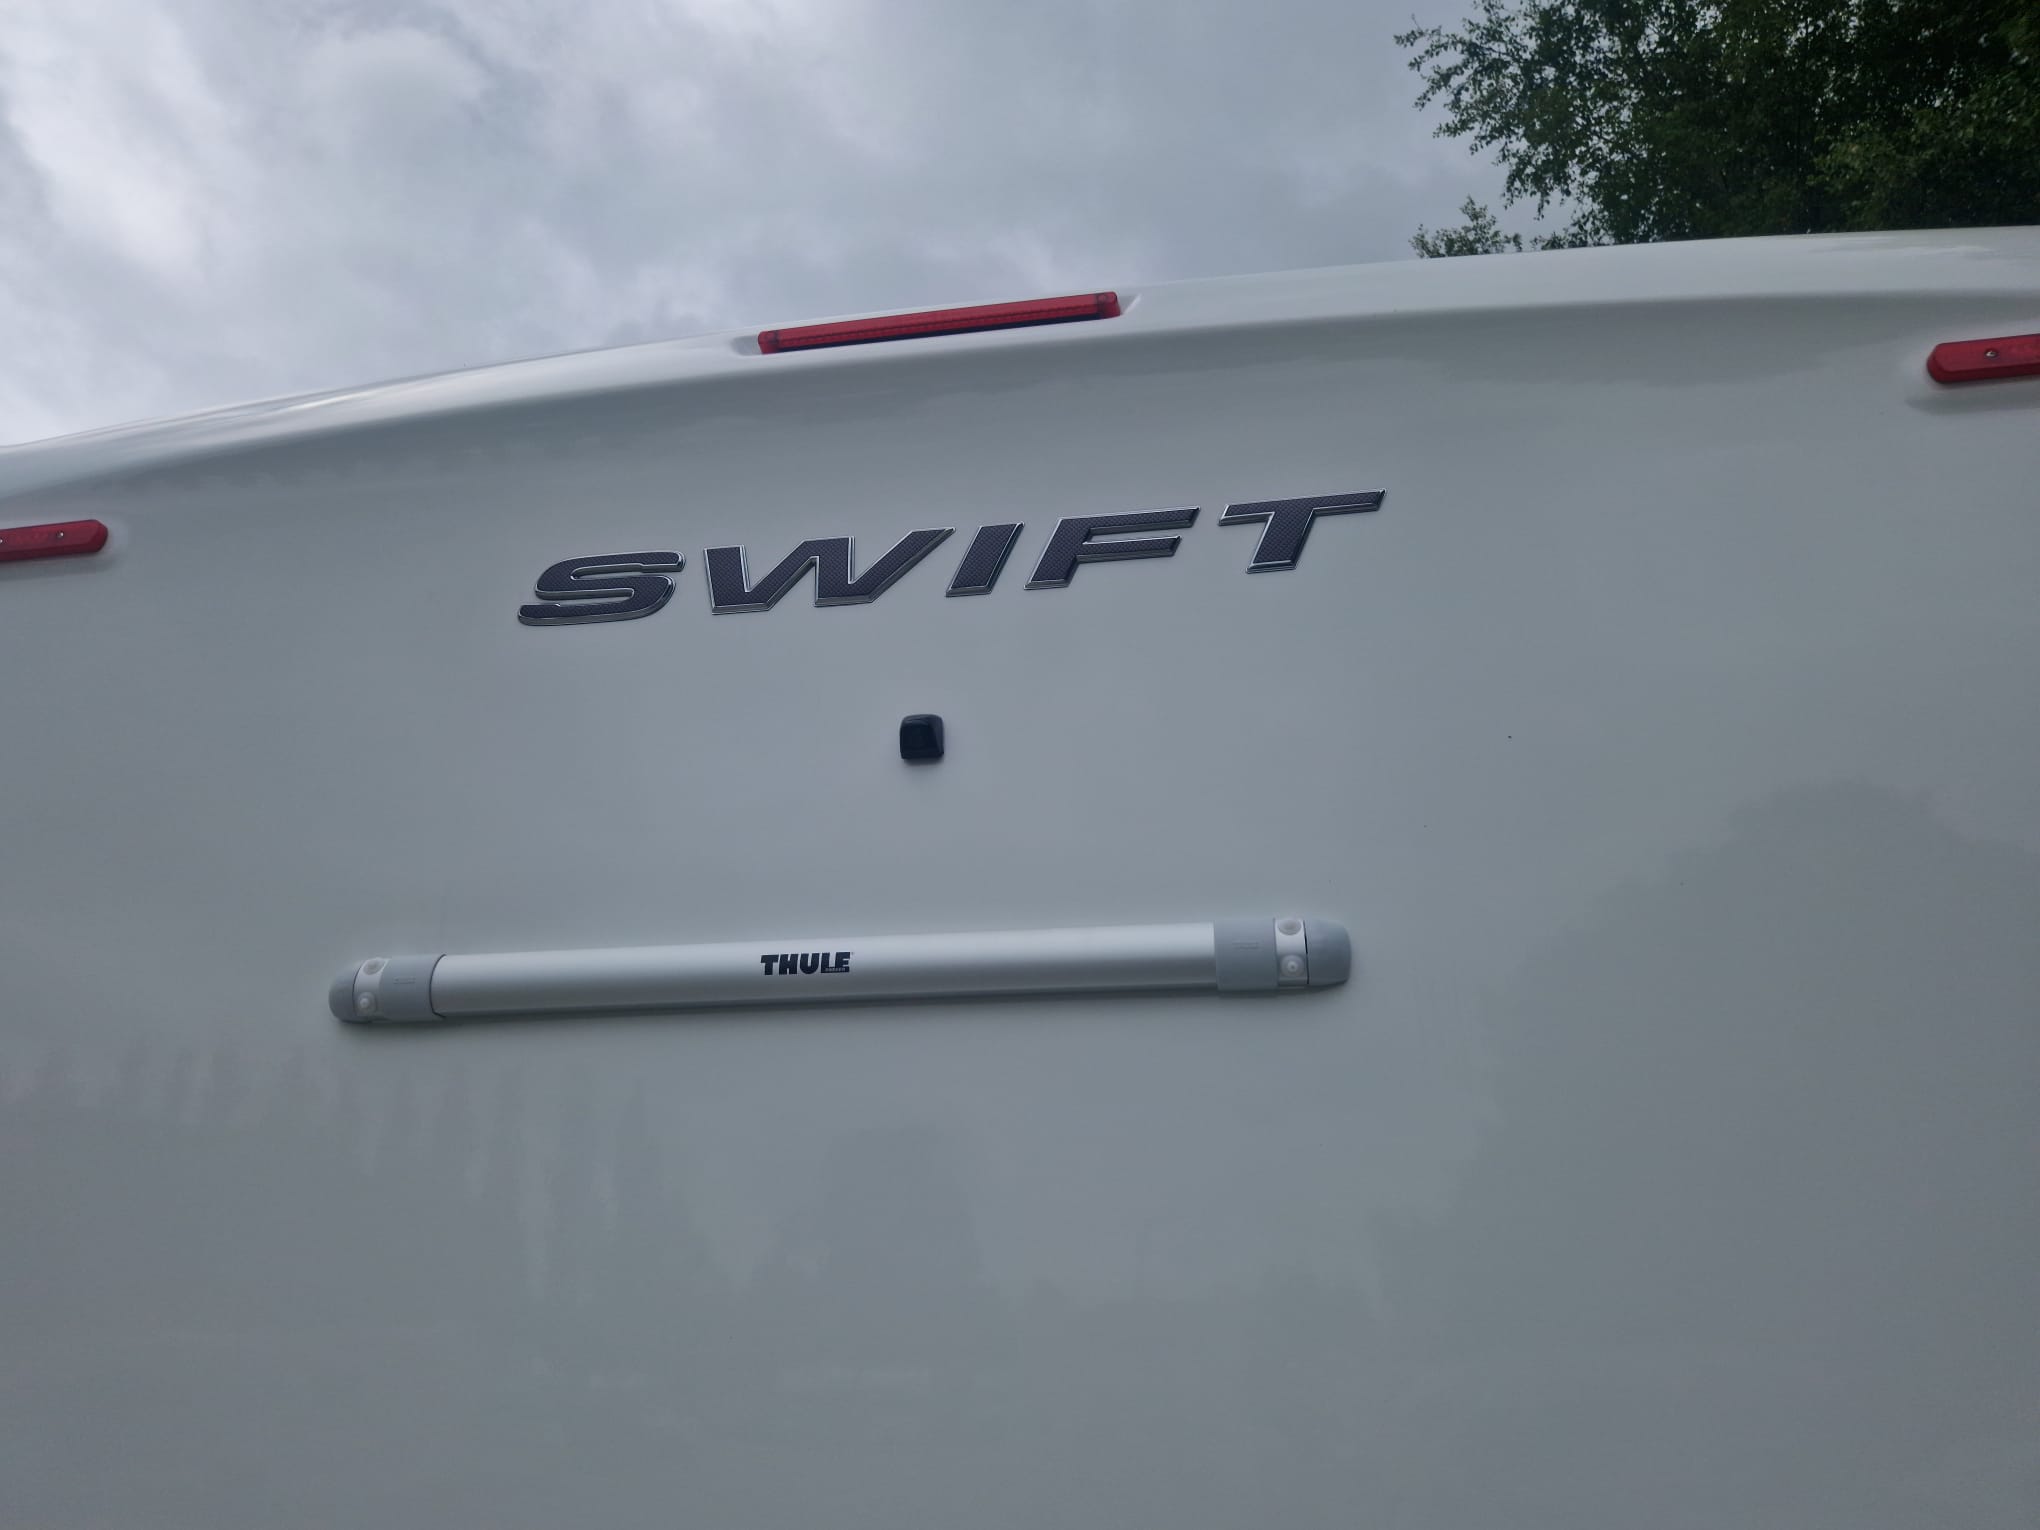 NEW Swift Voyager 564